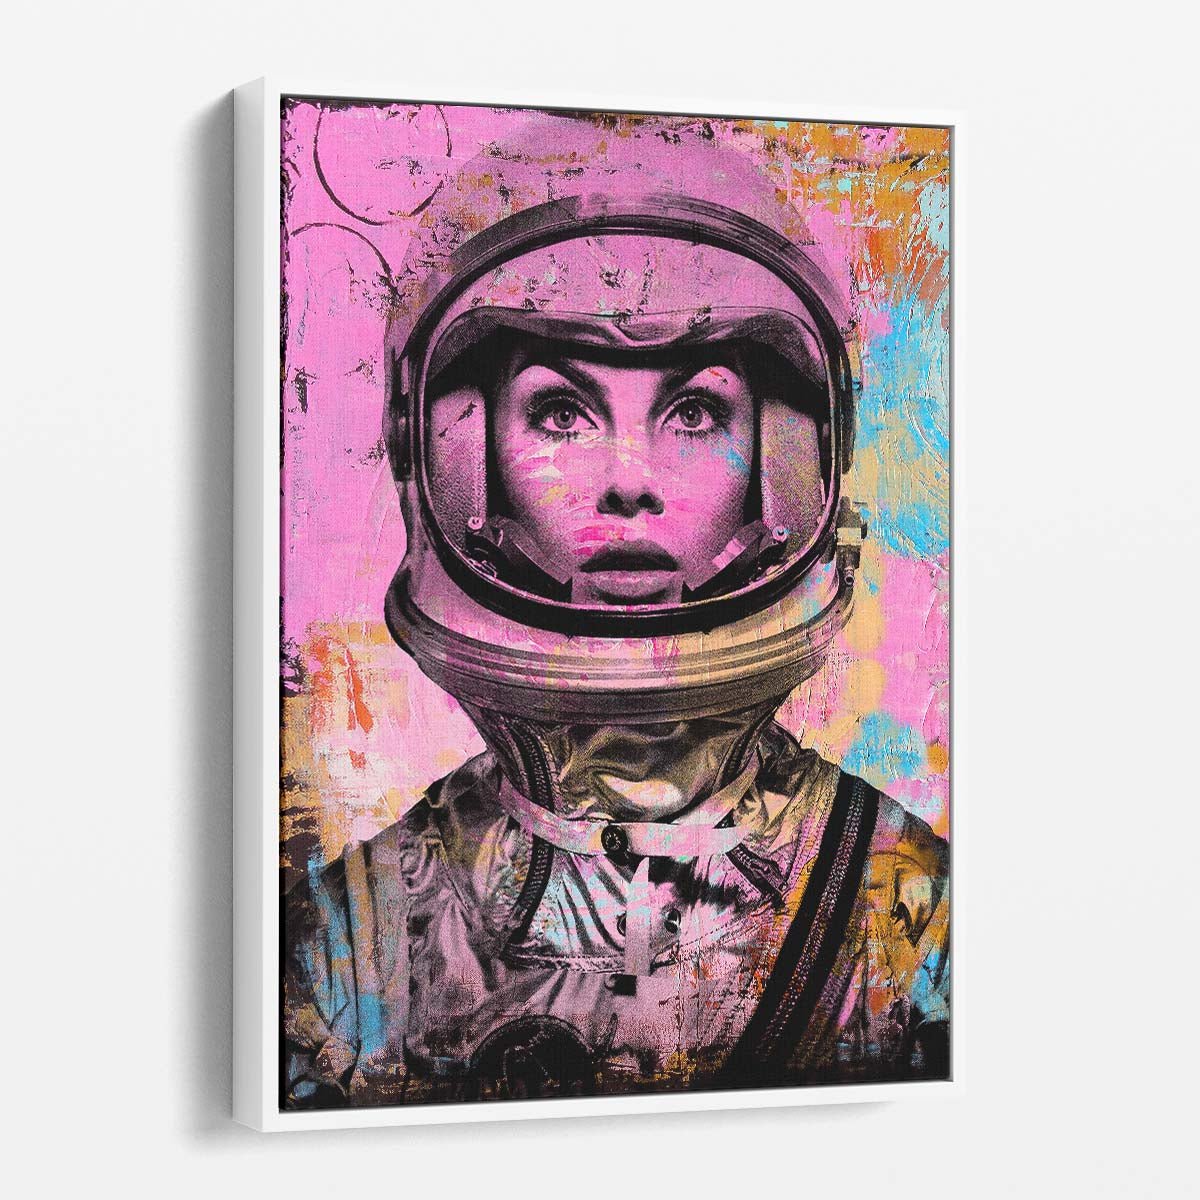 Jeannie Shrimpton Girl Astronaut 60s Space Age Circles Graffiti Wall Art by Luxuriance Designs. Made in USA.